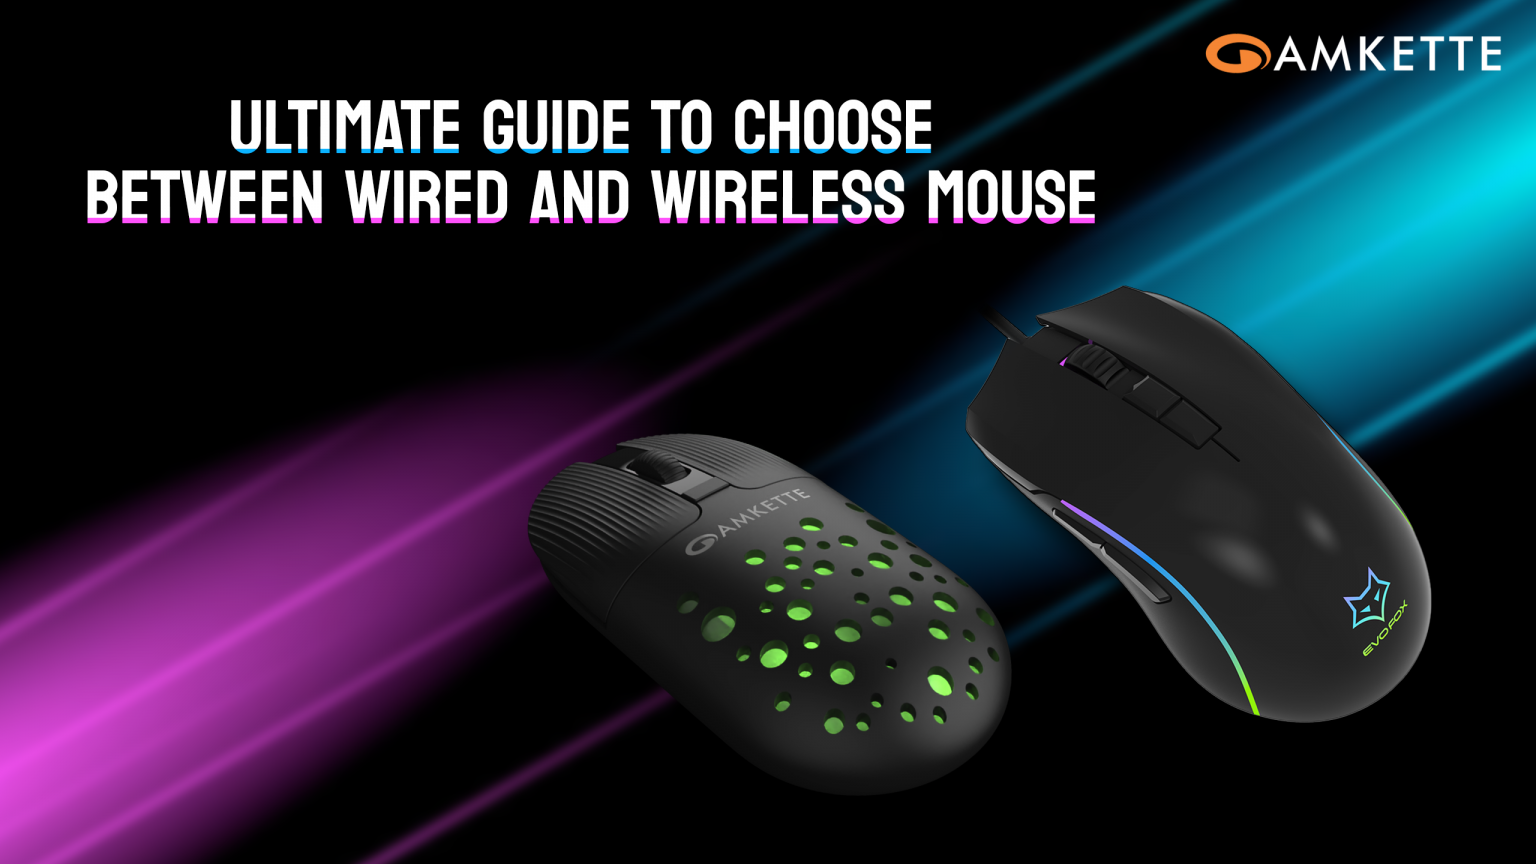 Wired Vs Wireless Mouse? Which one to go for? Let’s Find Out!